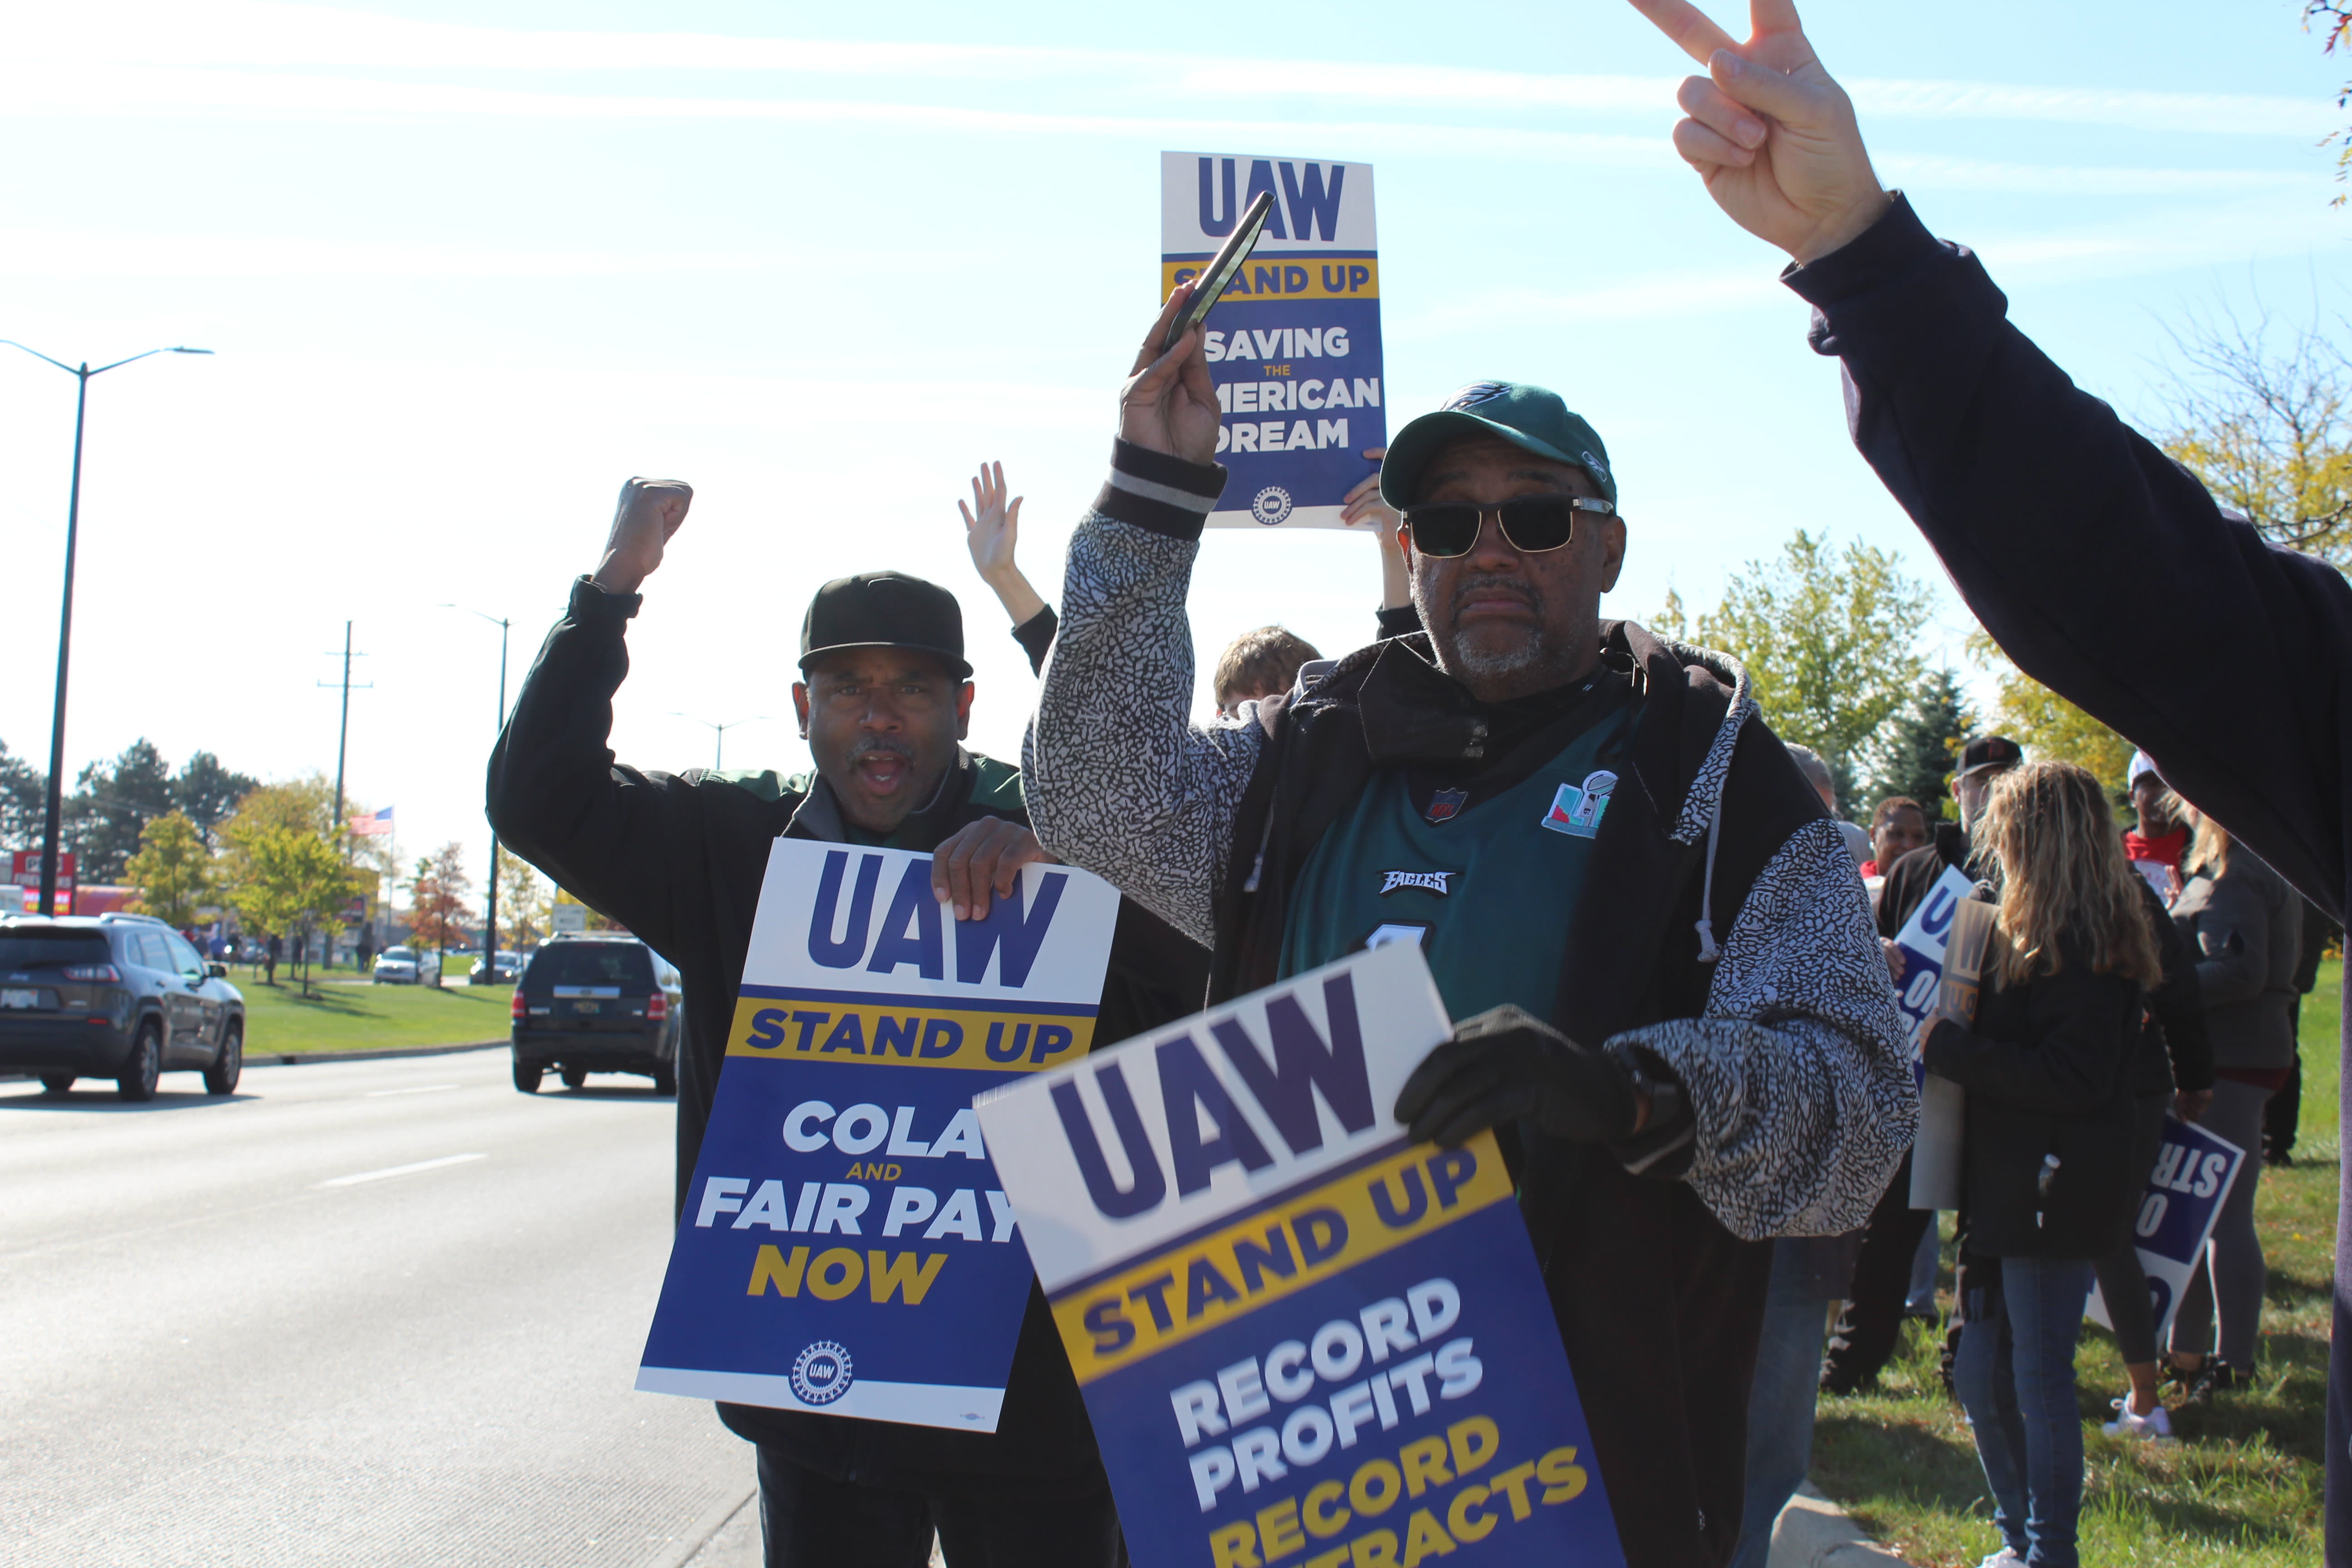 The UAW-Stellantis deal includes $18.9 billion in new investments